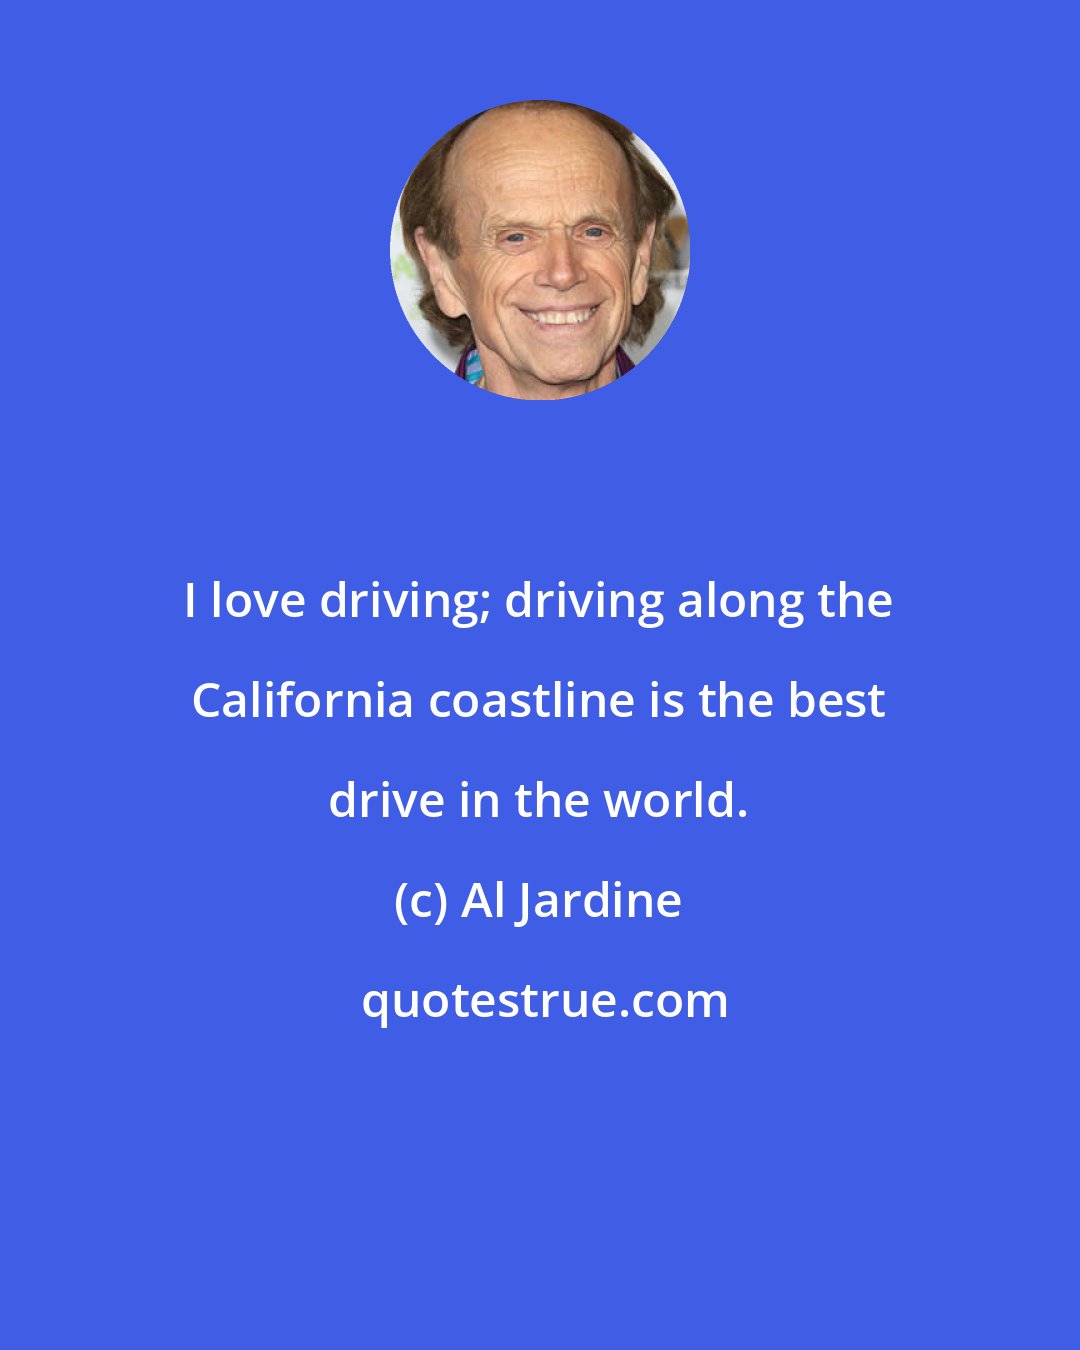 Al Jardine: I love driving; driving along the California coastline is the best drive in the world.